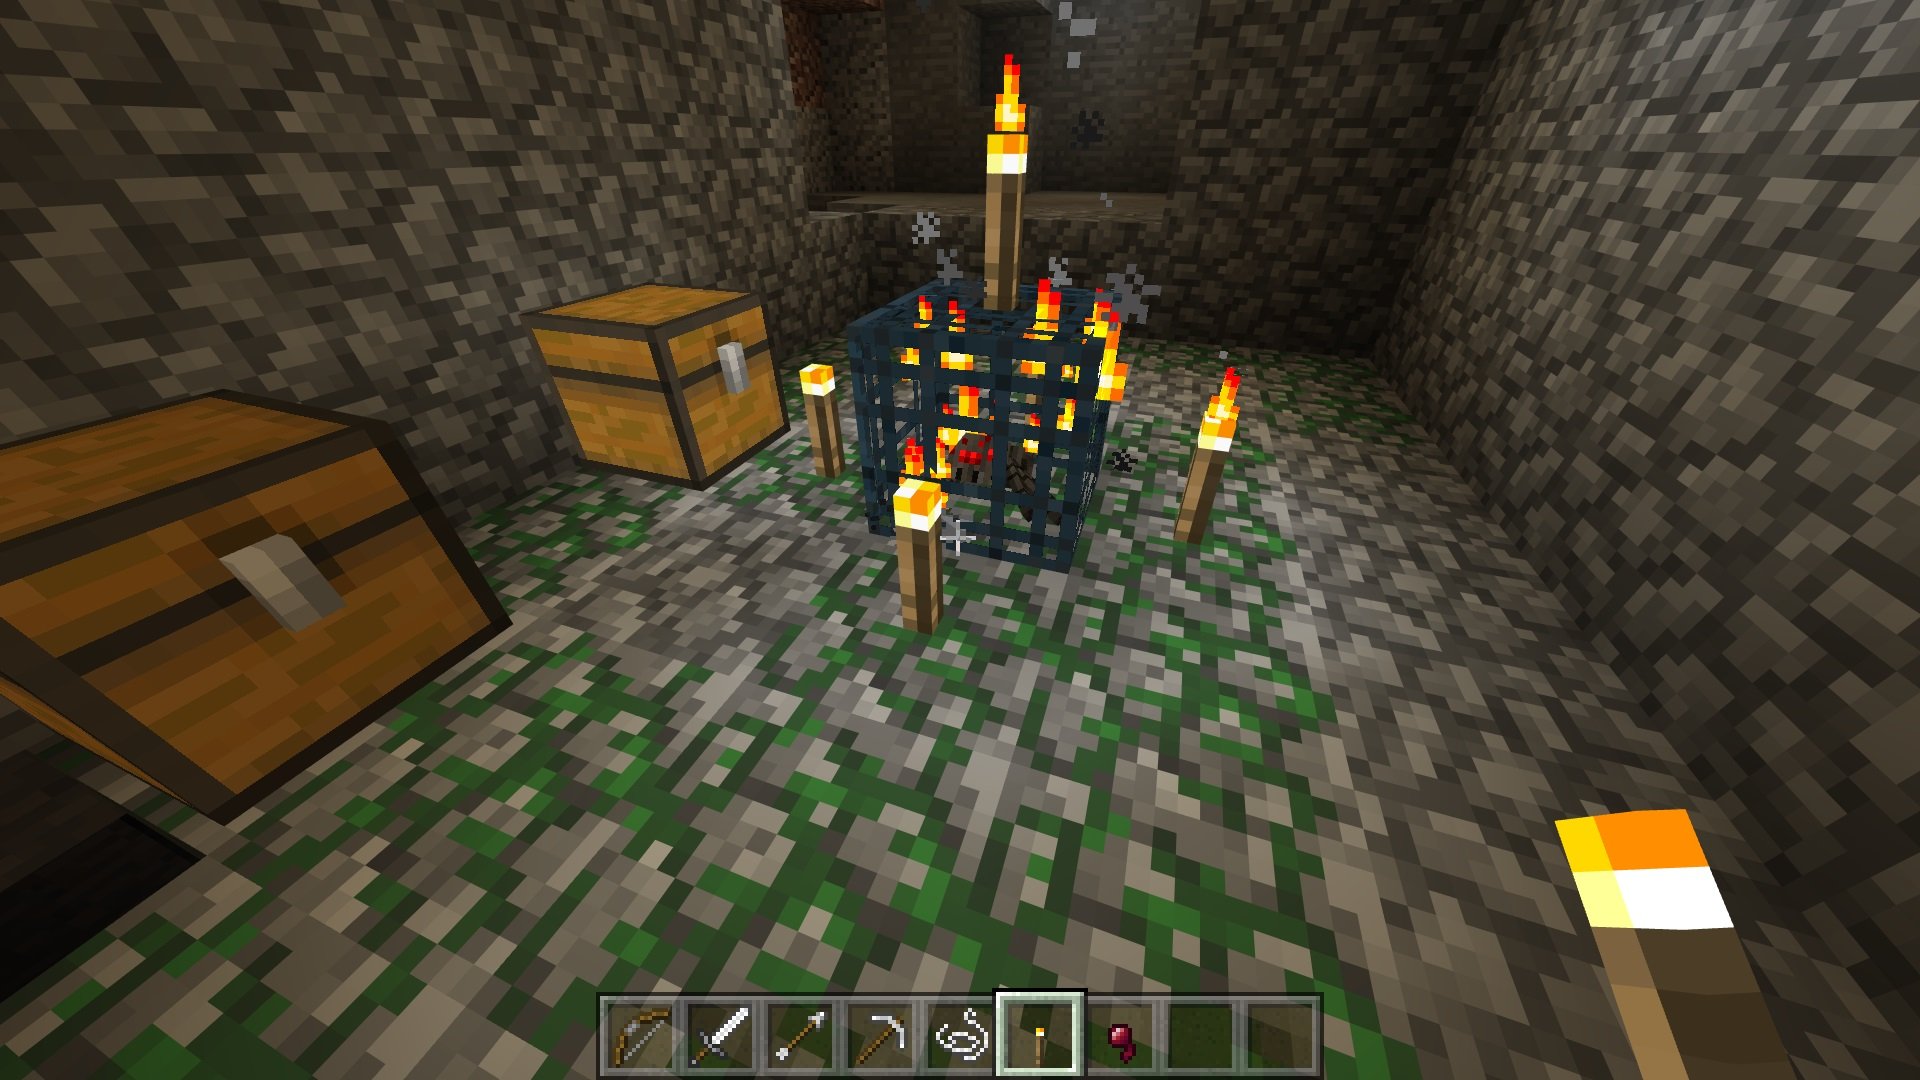 Torches around the spawner stops monsters from spawning.